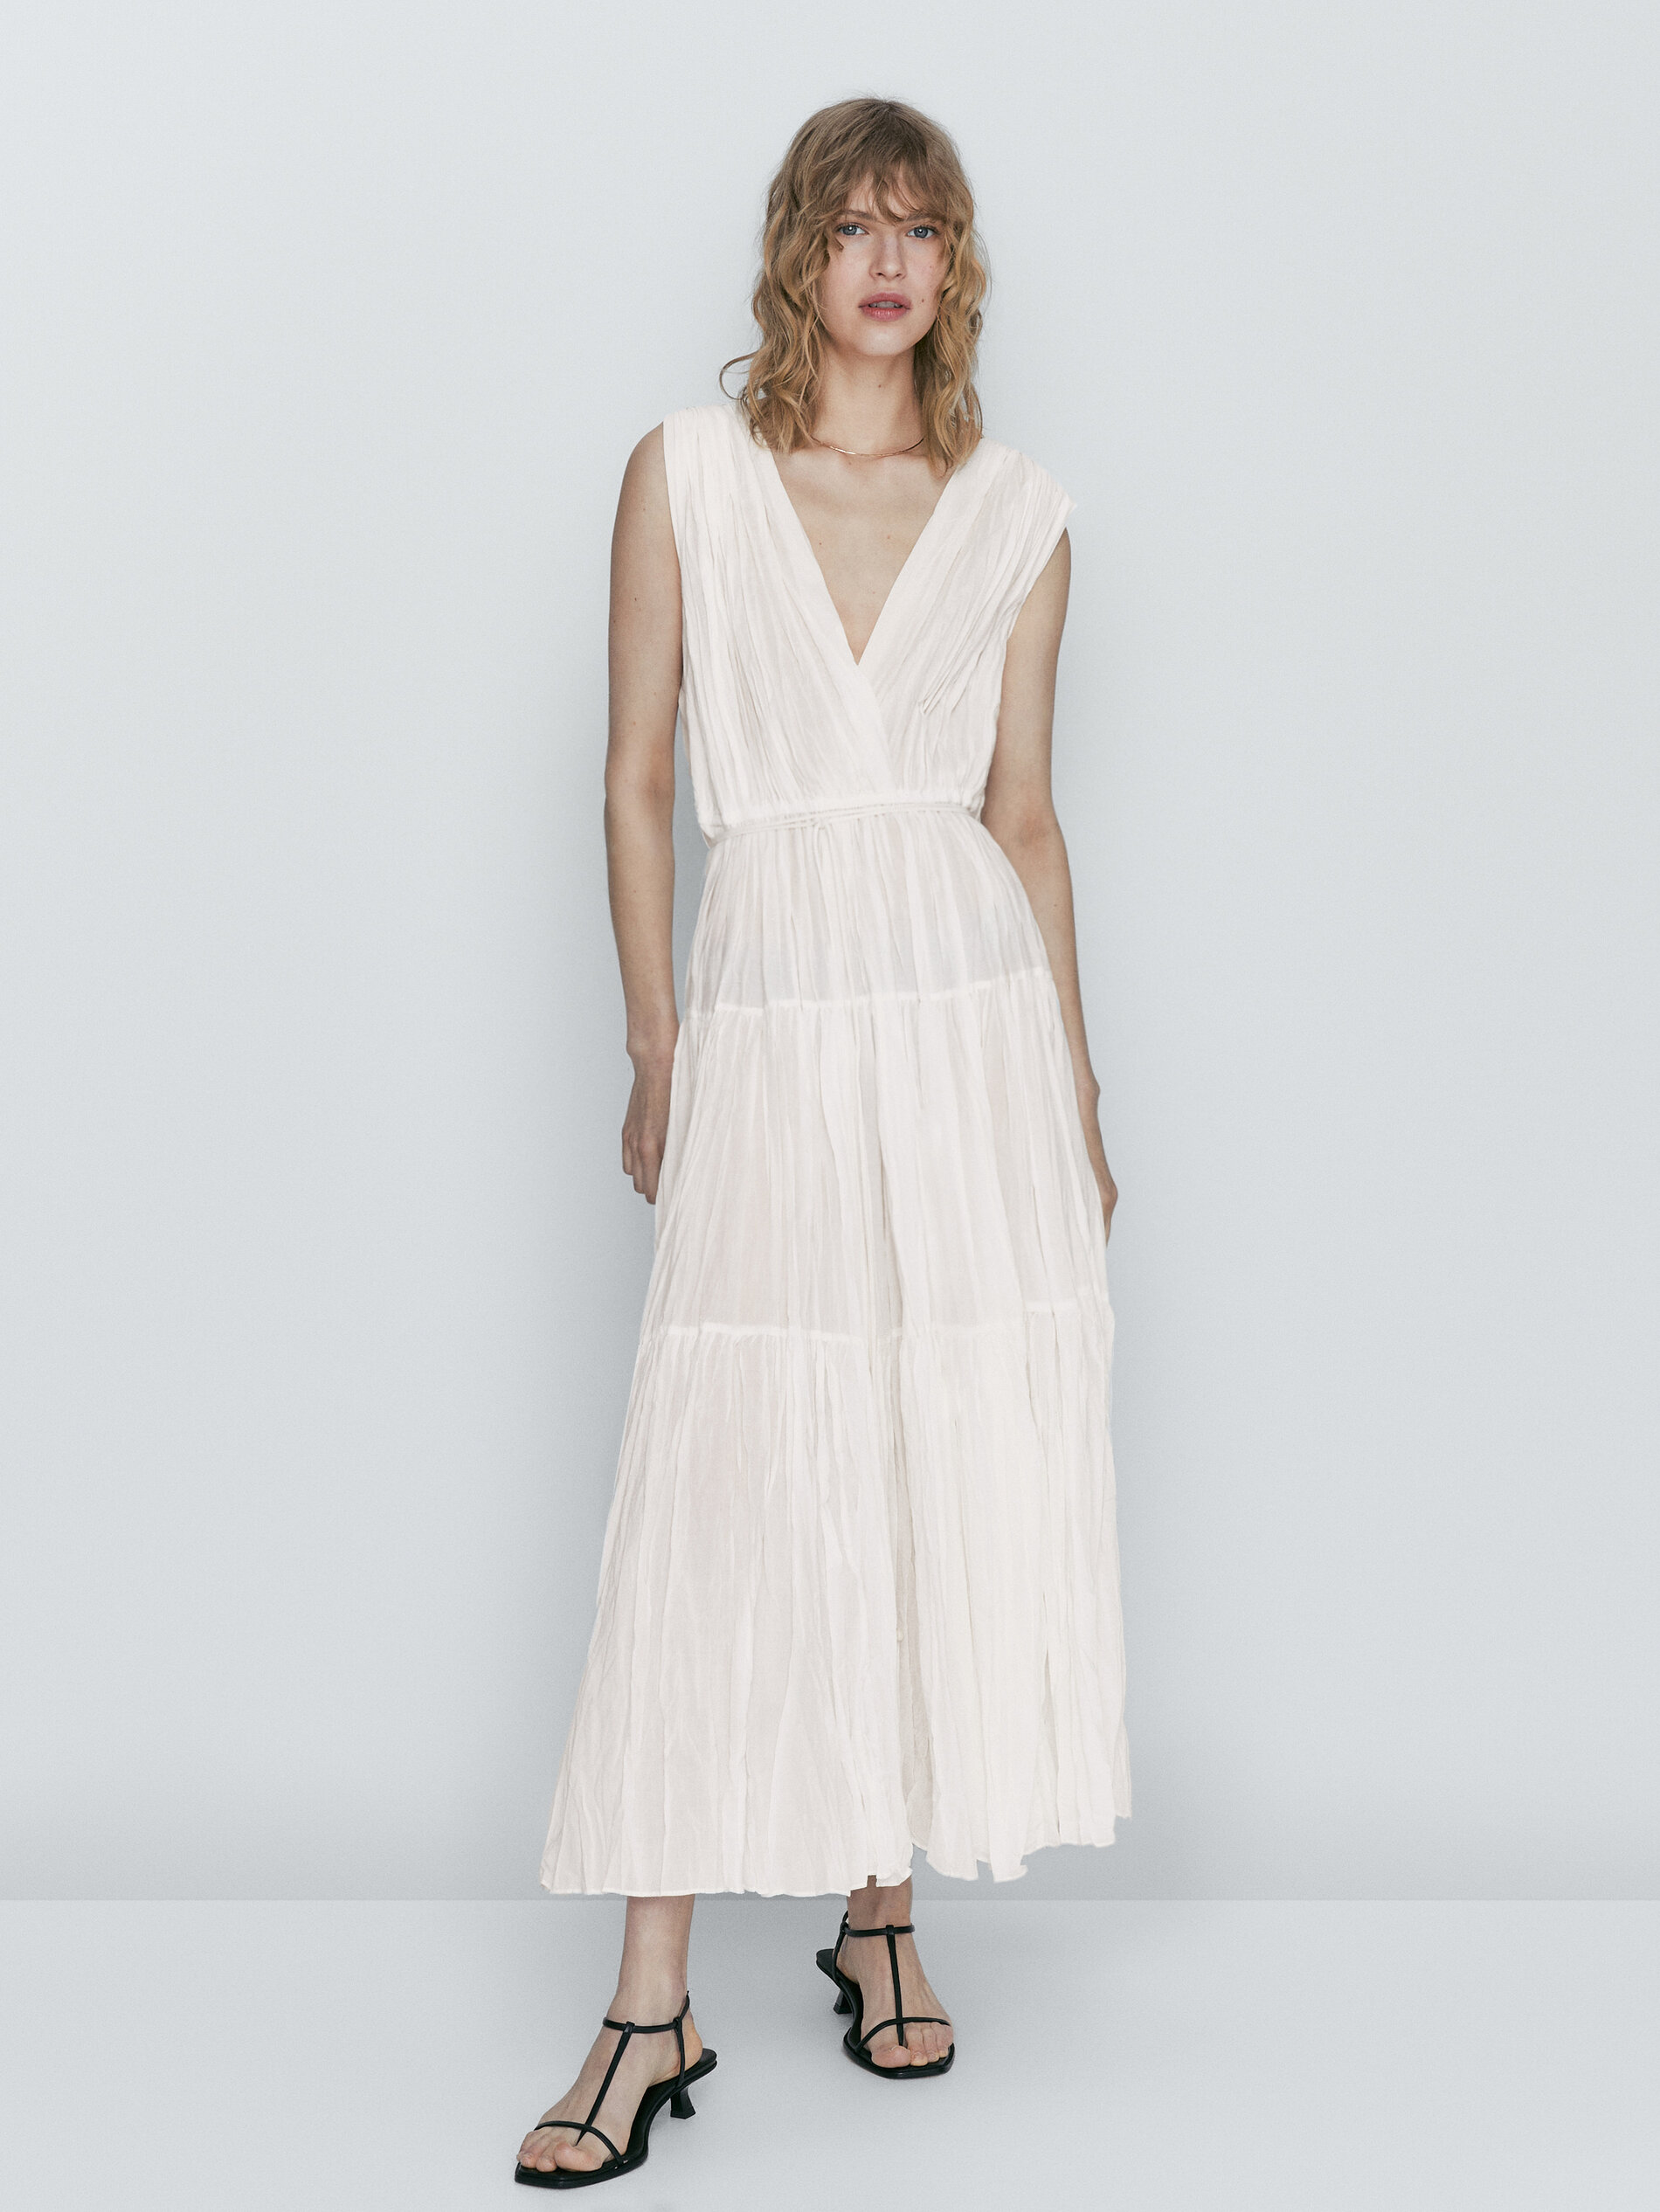 Pleated dress with drawstring